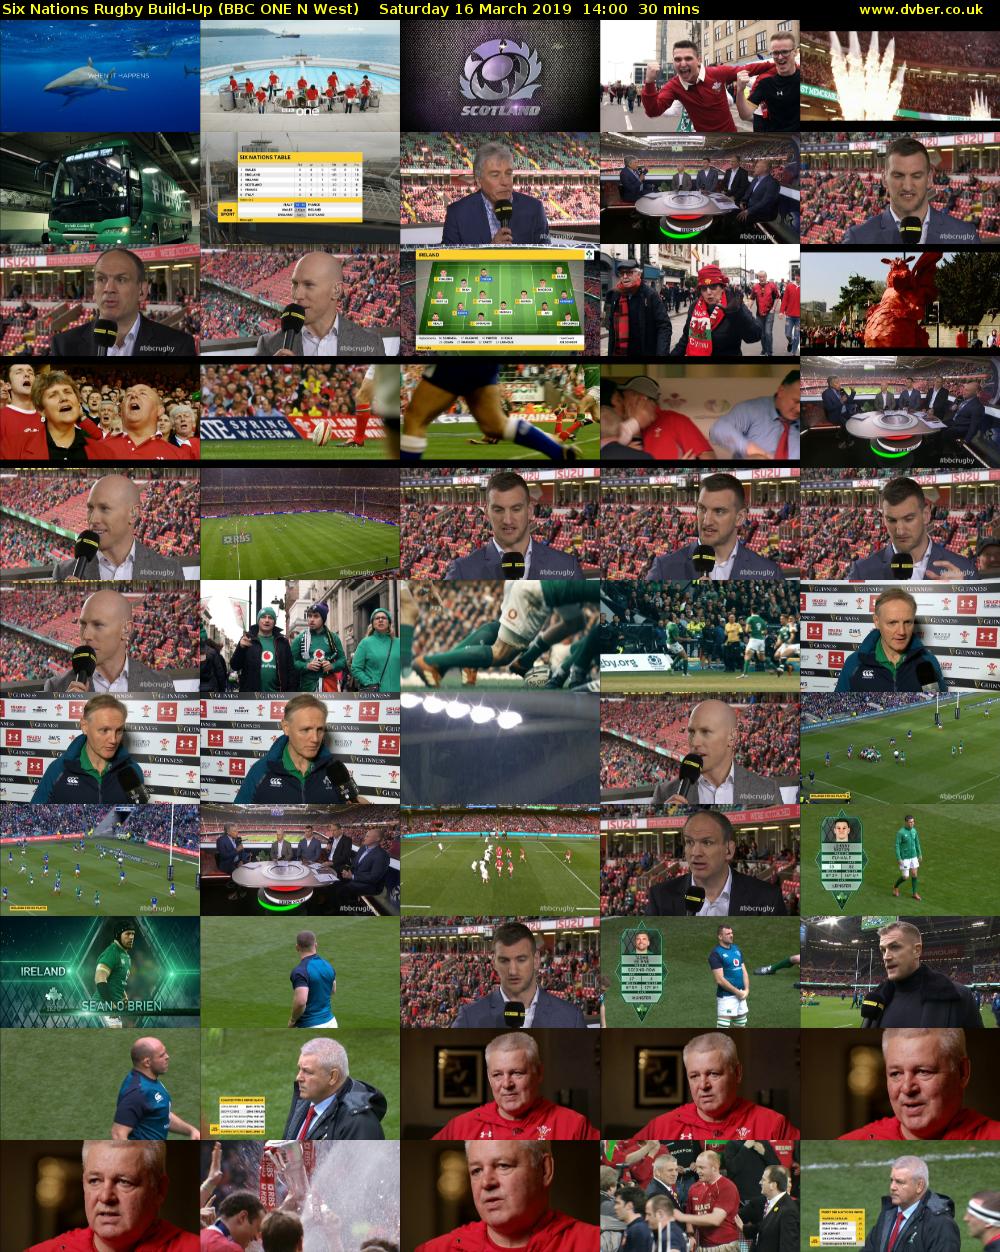 Six Nations Rugby Build-Up (BBC ONE N West) Saturday 16 March 2019 14:00 - 14:30